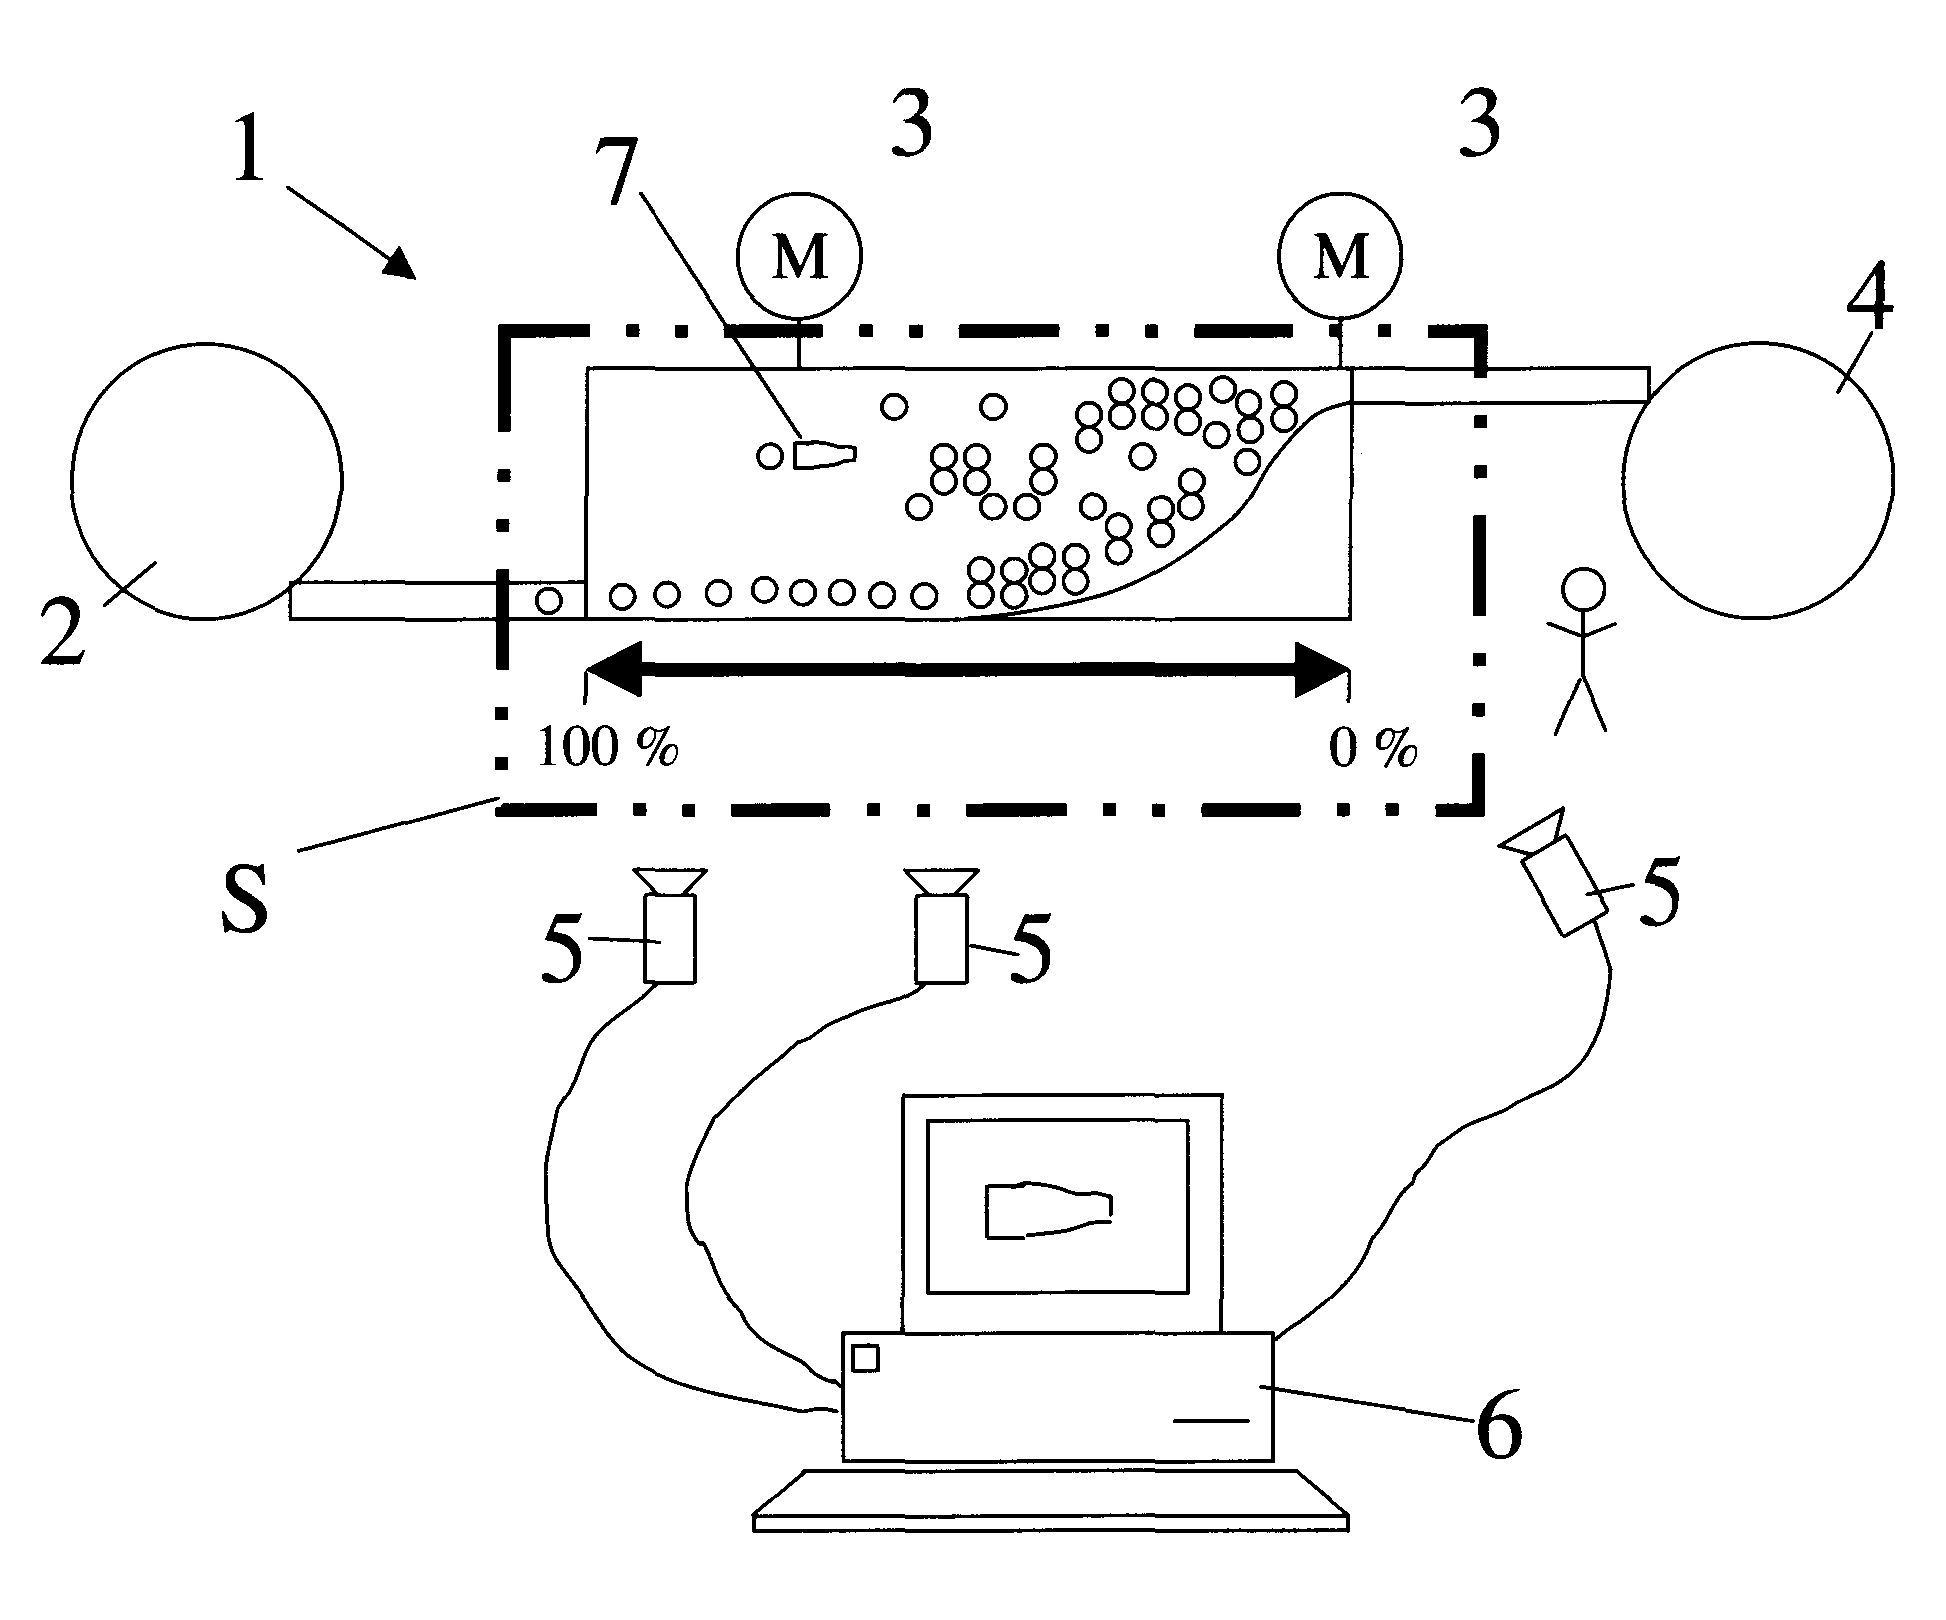 Method for the monitoring, control and optimization of filling equipment for foods and beverages, such as, for beverage bottles